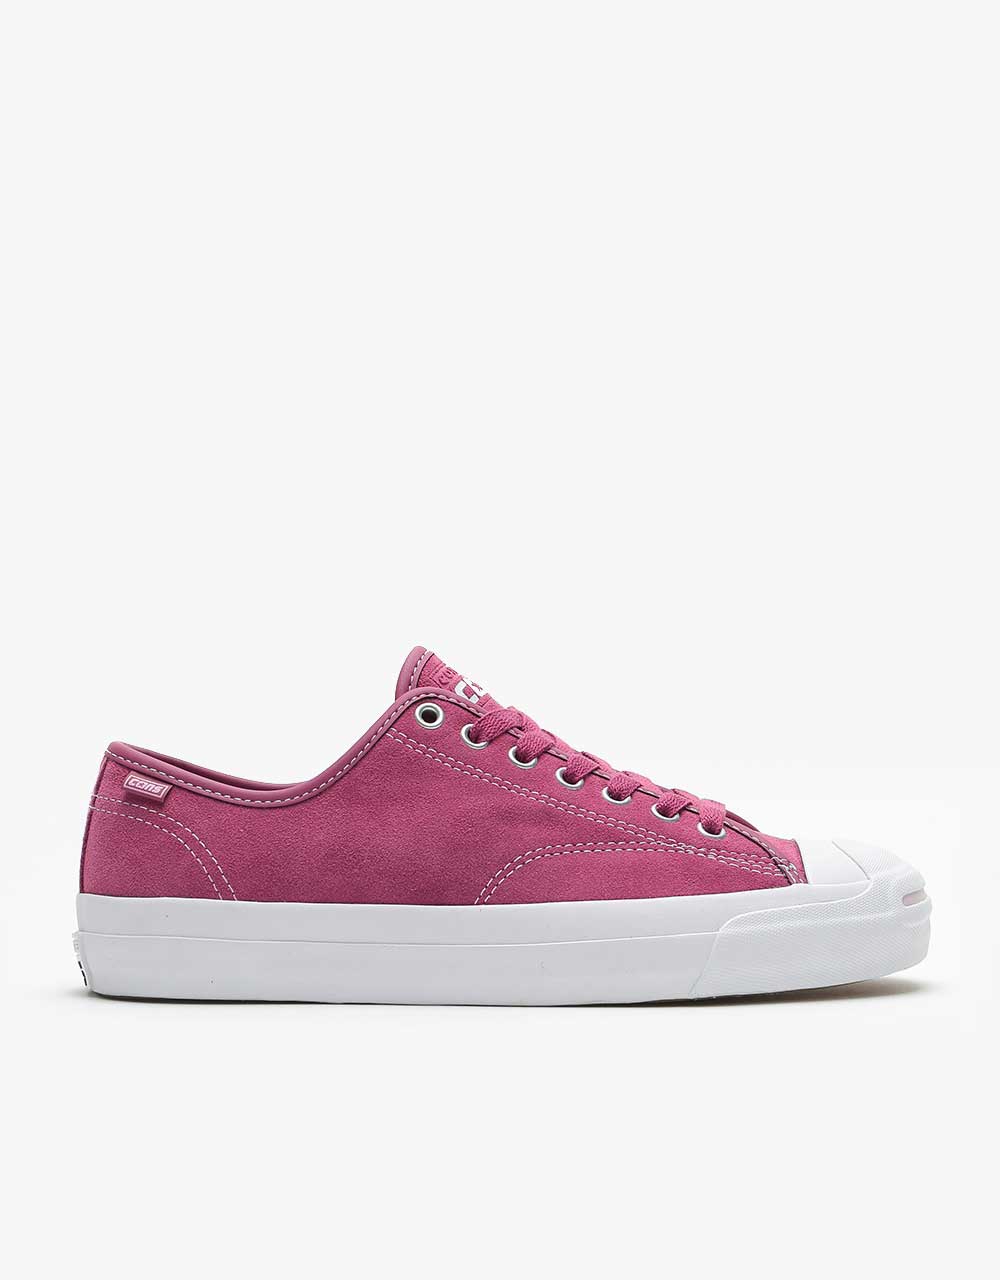 Converse Jack Purcell Pro Ox Skate Shoes - Mesa Rose/White/White – Route One